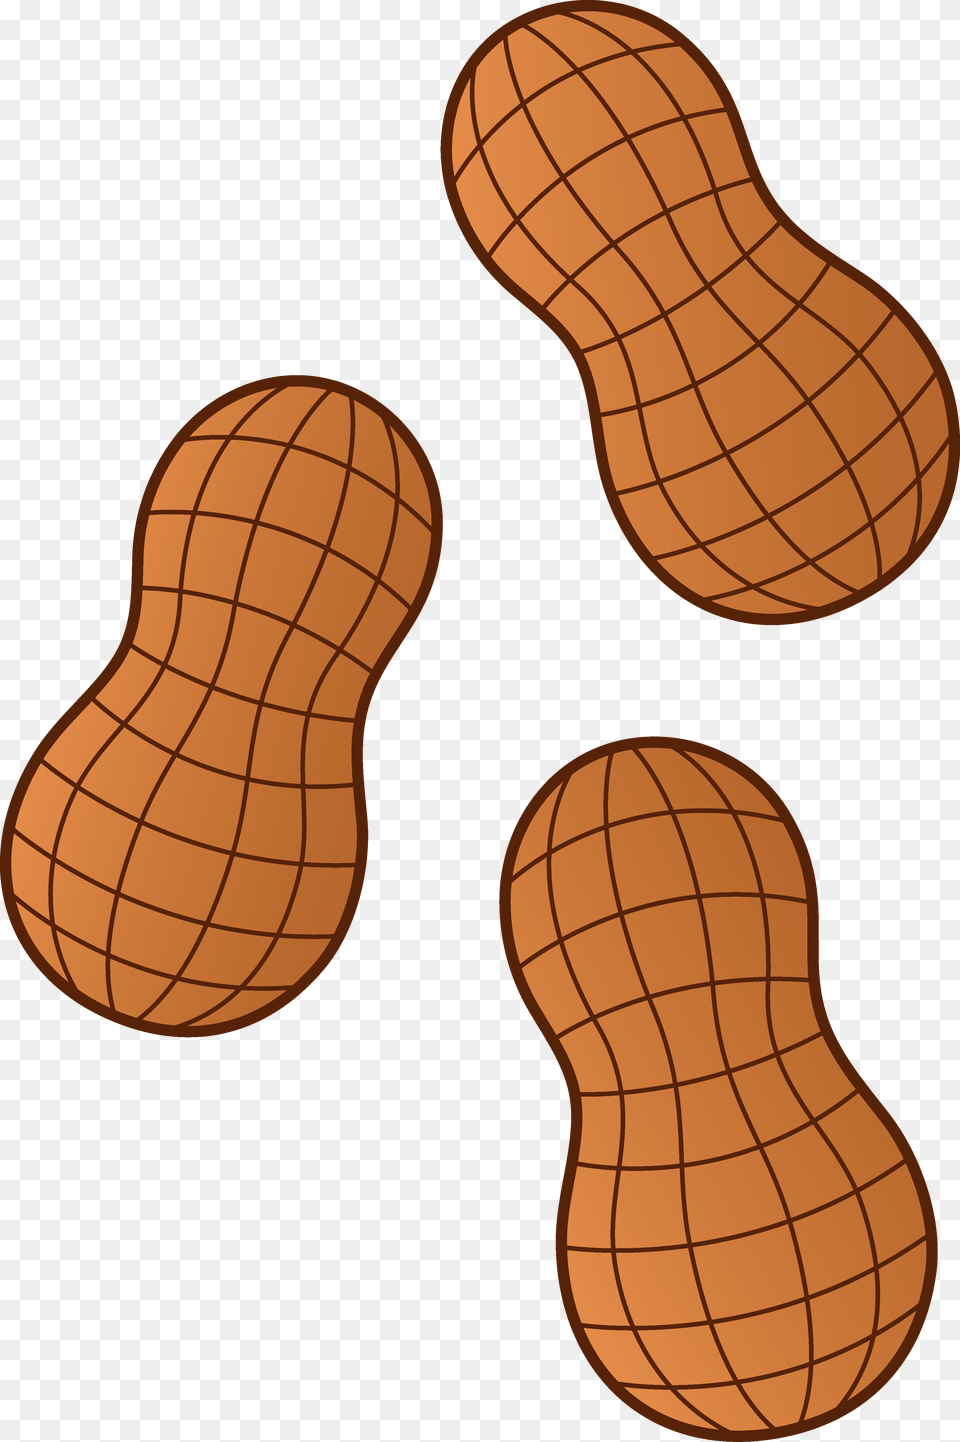 Brown Peanut Clip Art Free Image, Food, Nut, Plant, Produce Png